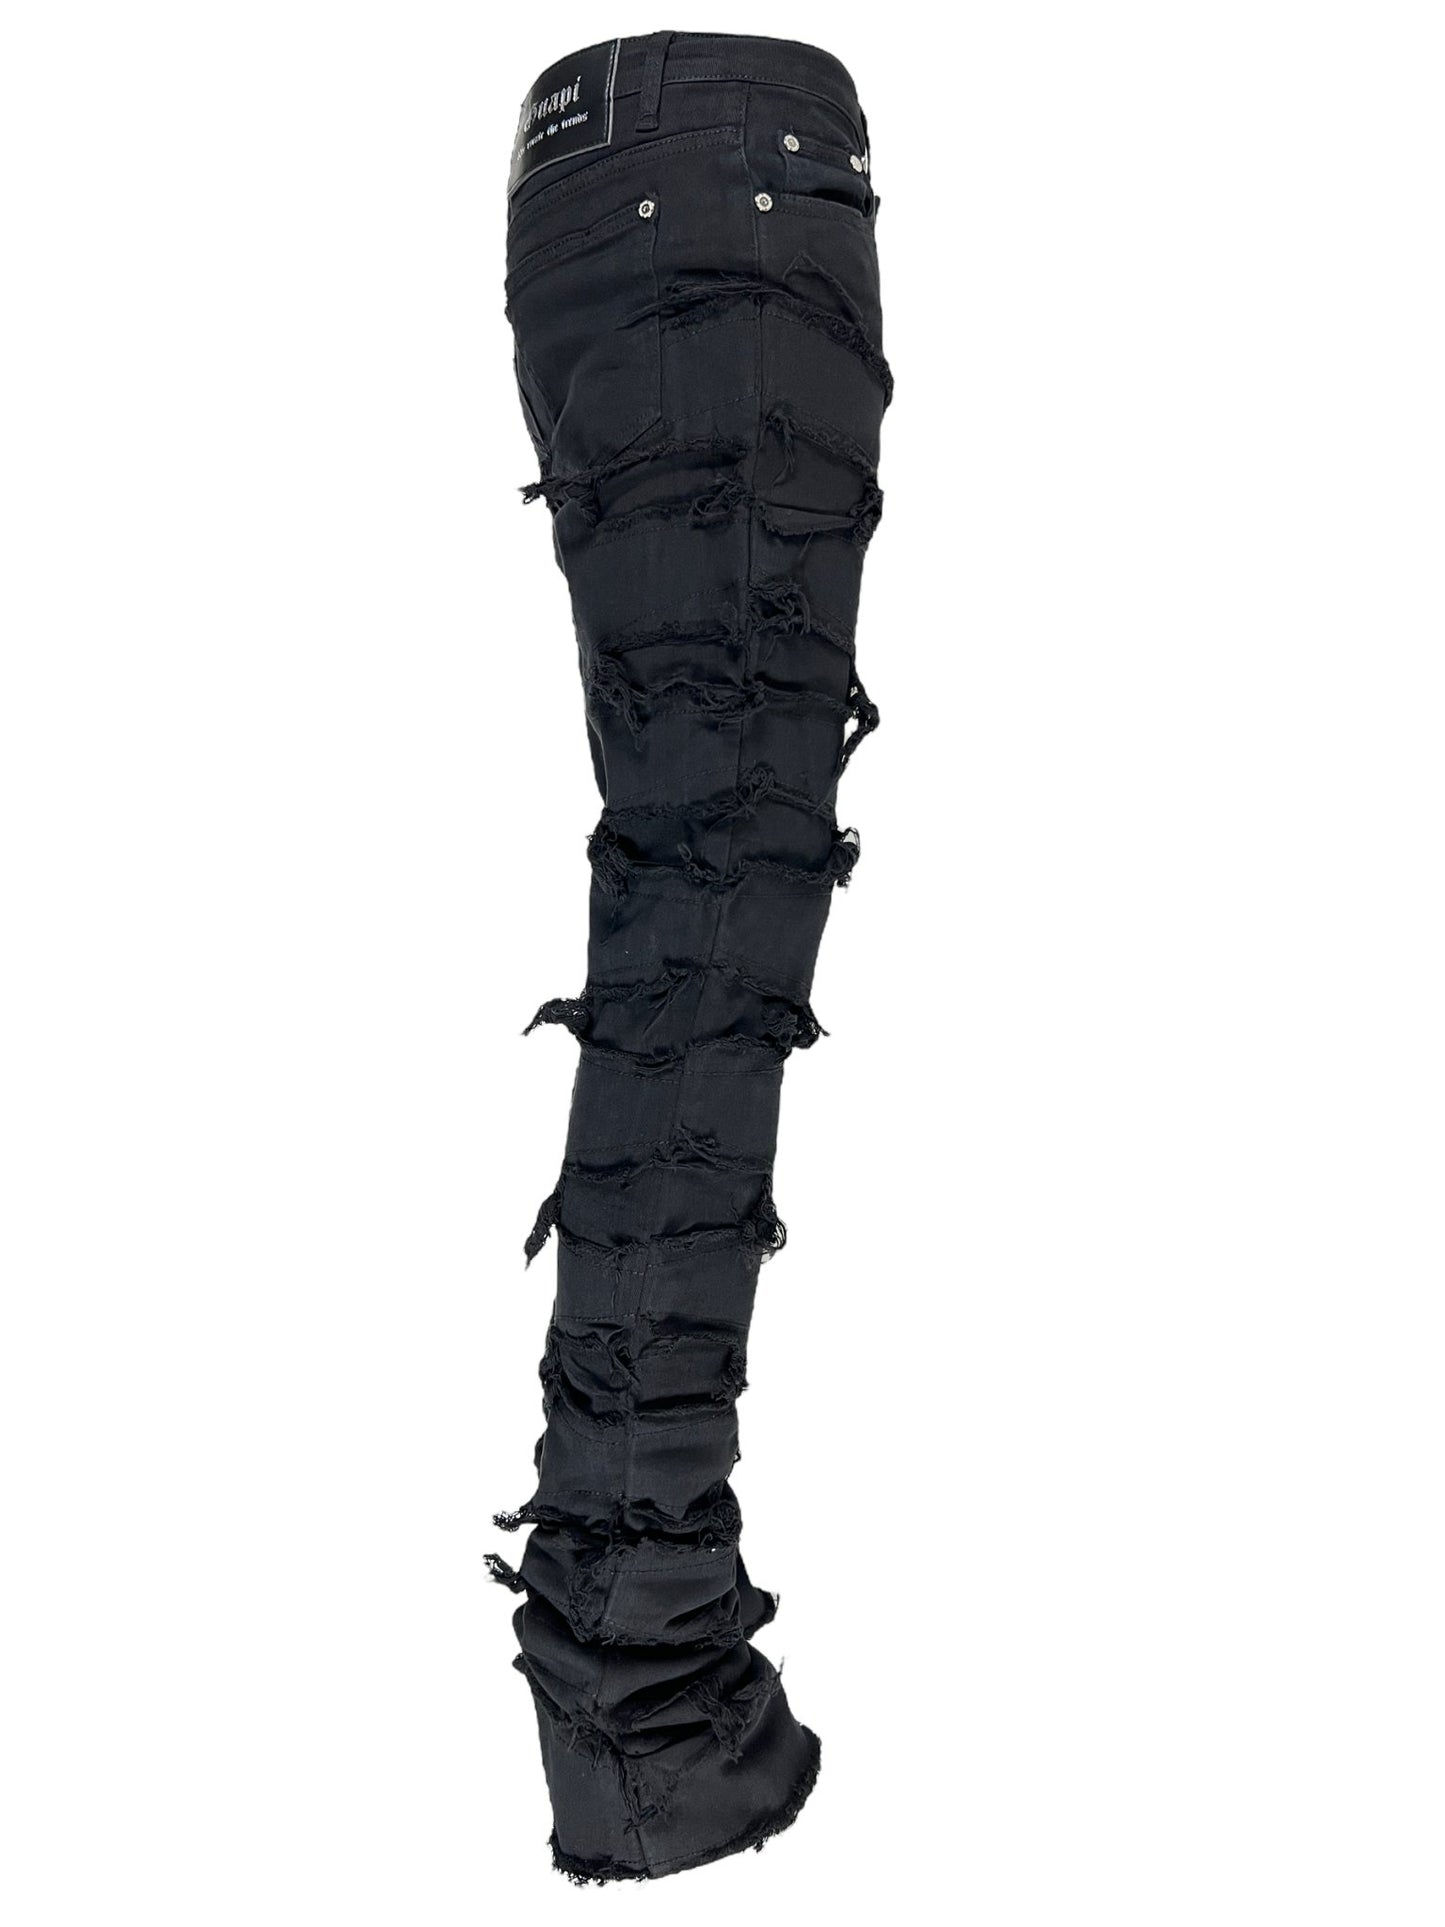 GUAPI OBSIDIAN BLACK BLOOD DIAMOND STACKED DENIM jeans with multiple horizontal rips down the legs.